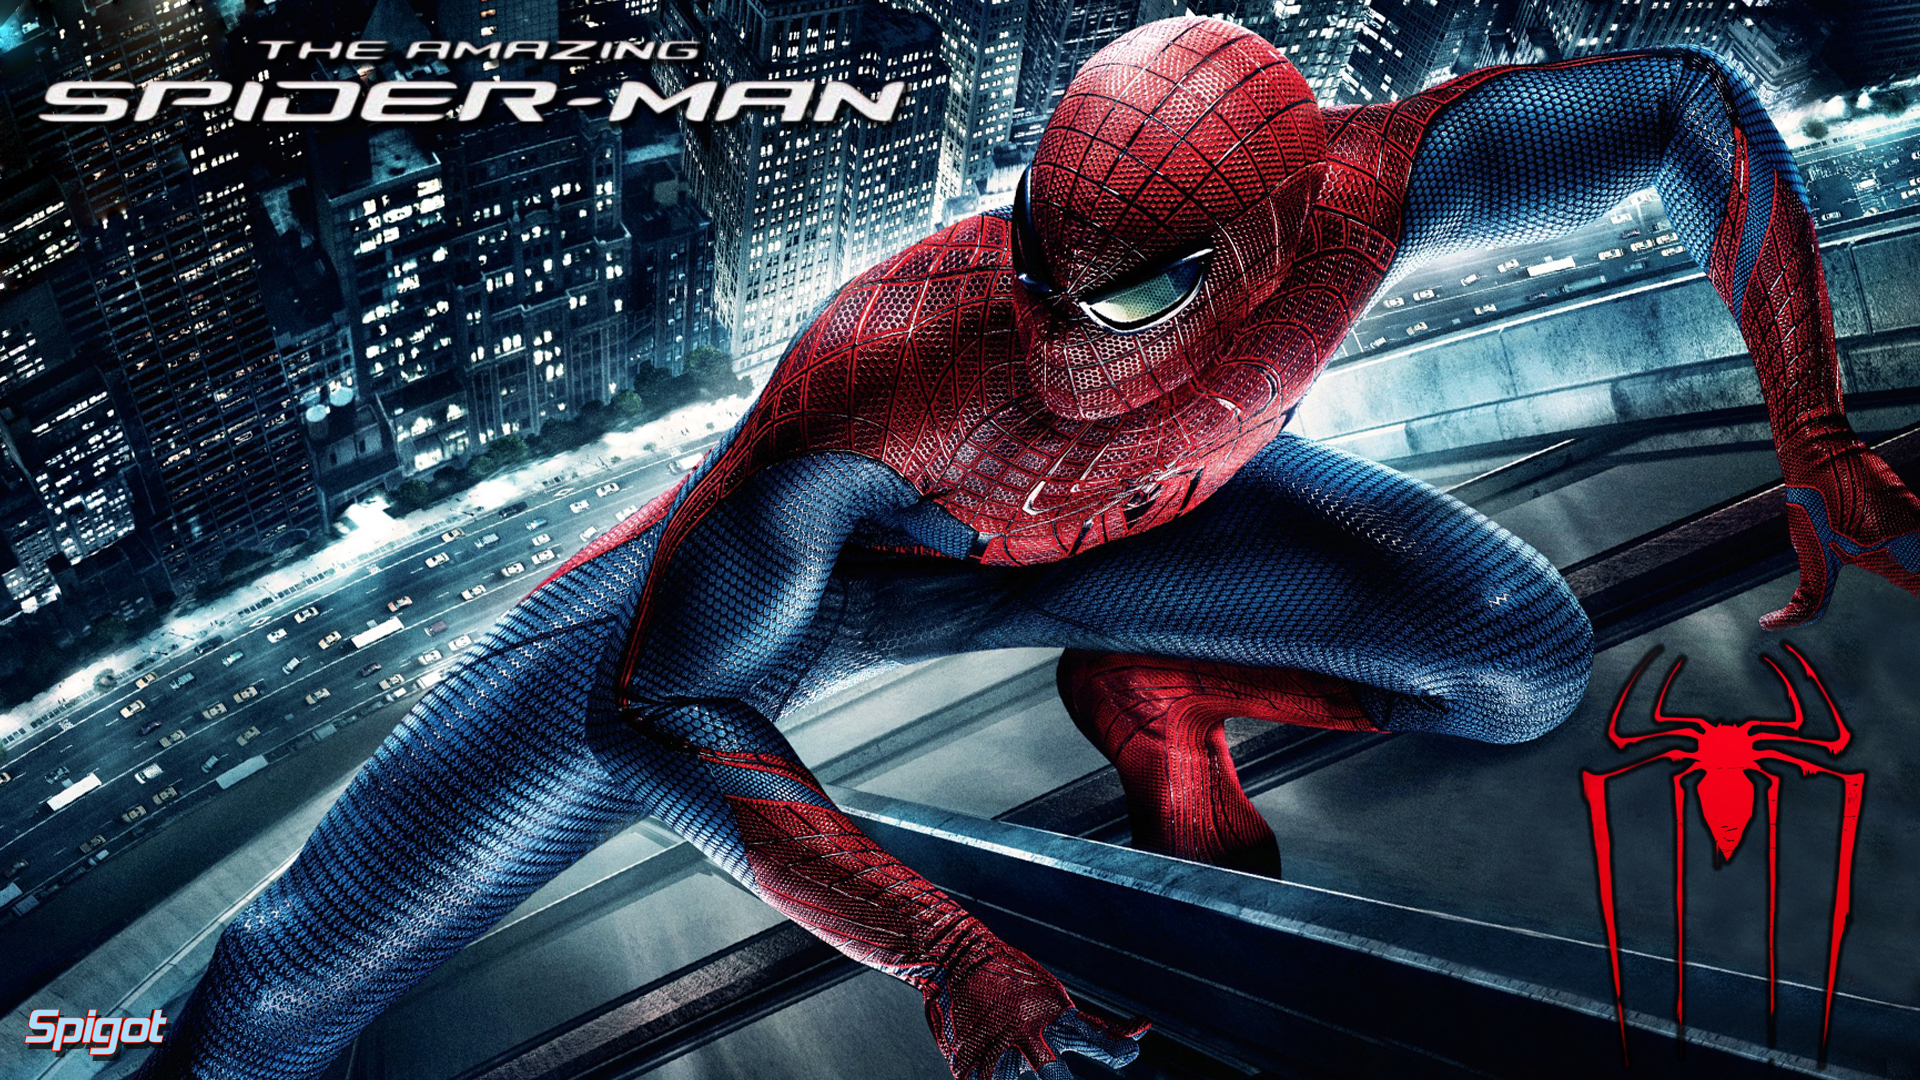 More Amazing Spider Man Wallpapers George Spigots Blog